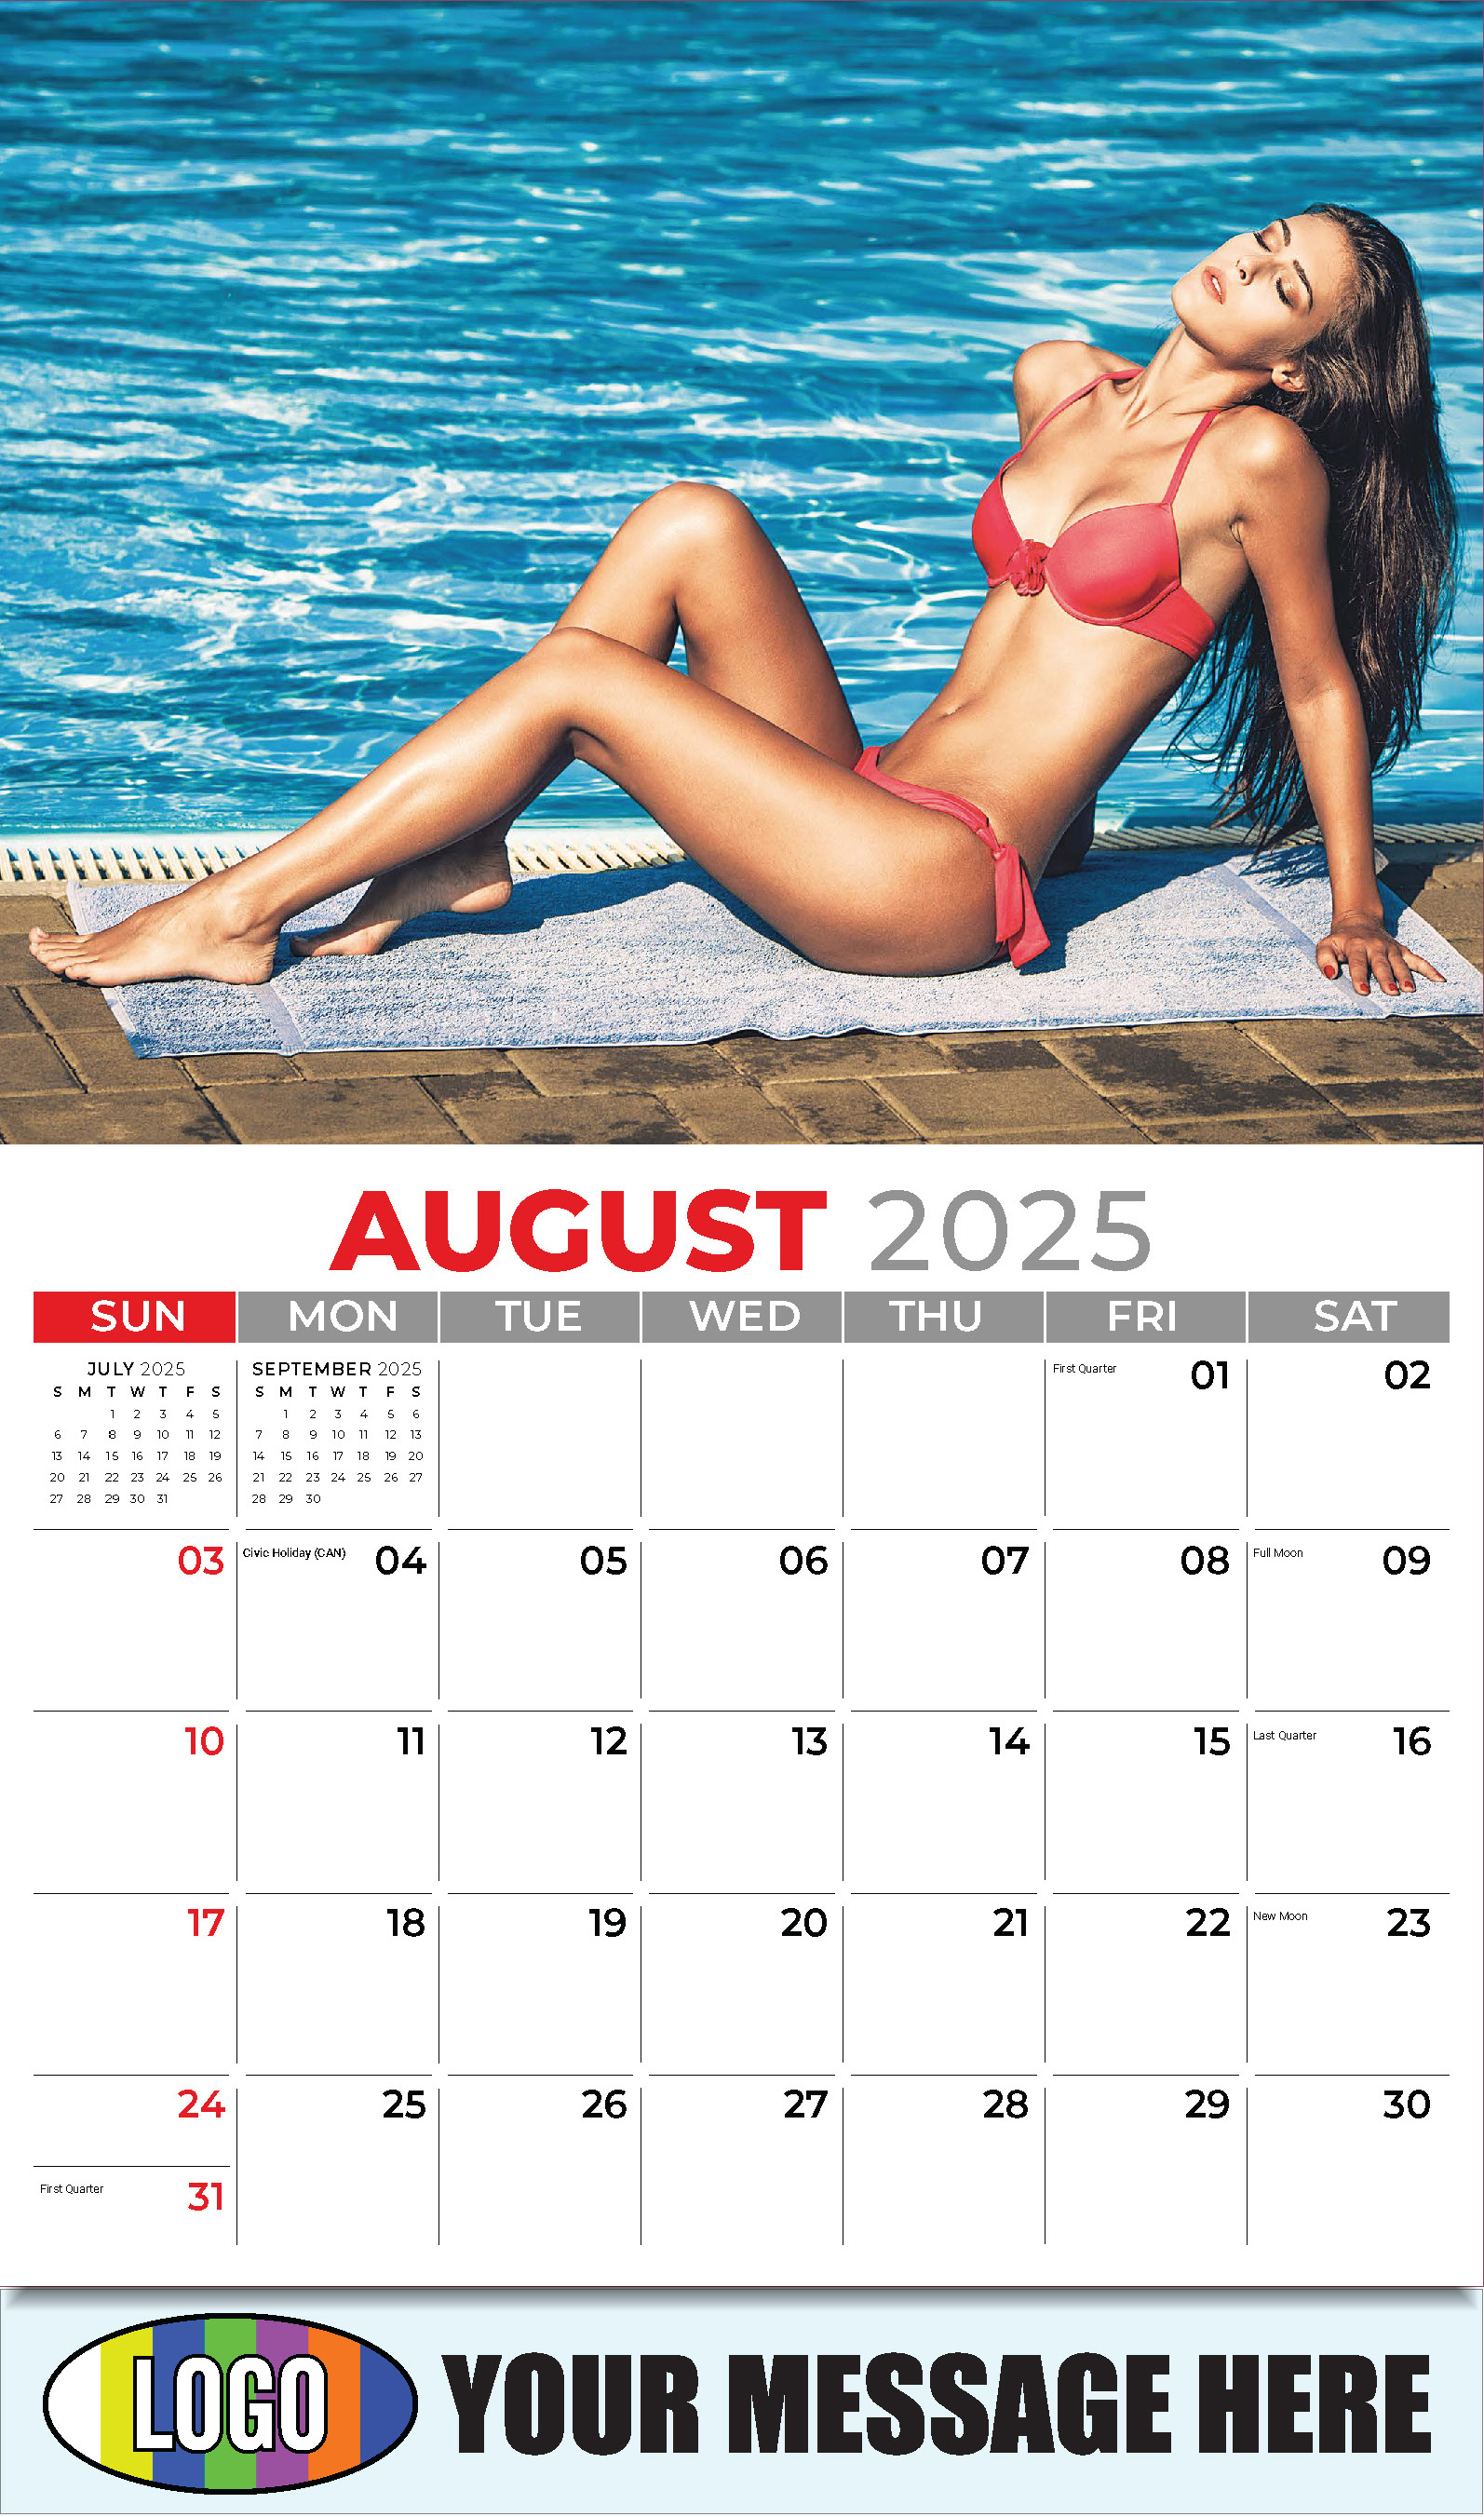 Swimsuits 2025 Business Promotional Wall Calendar - August